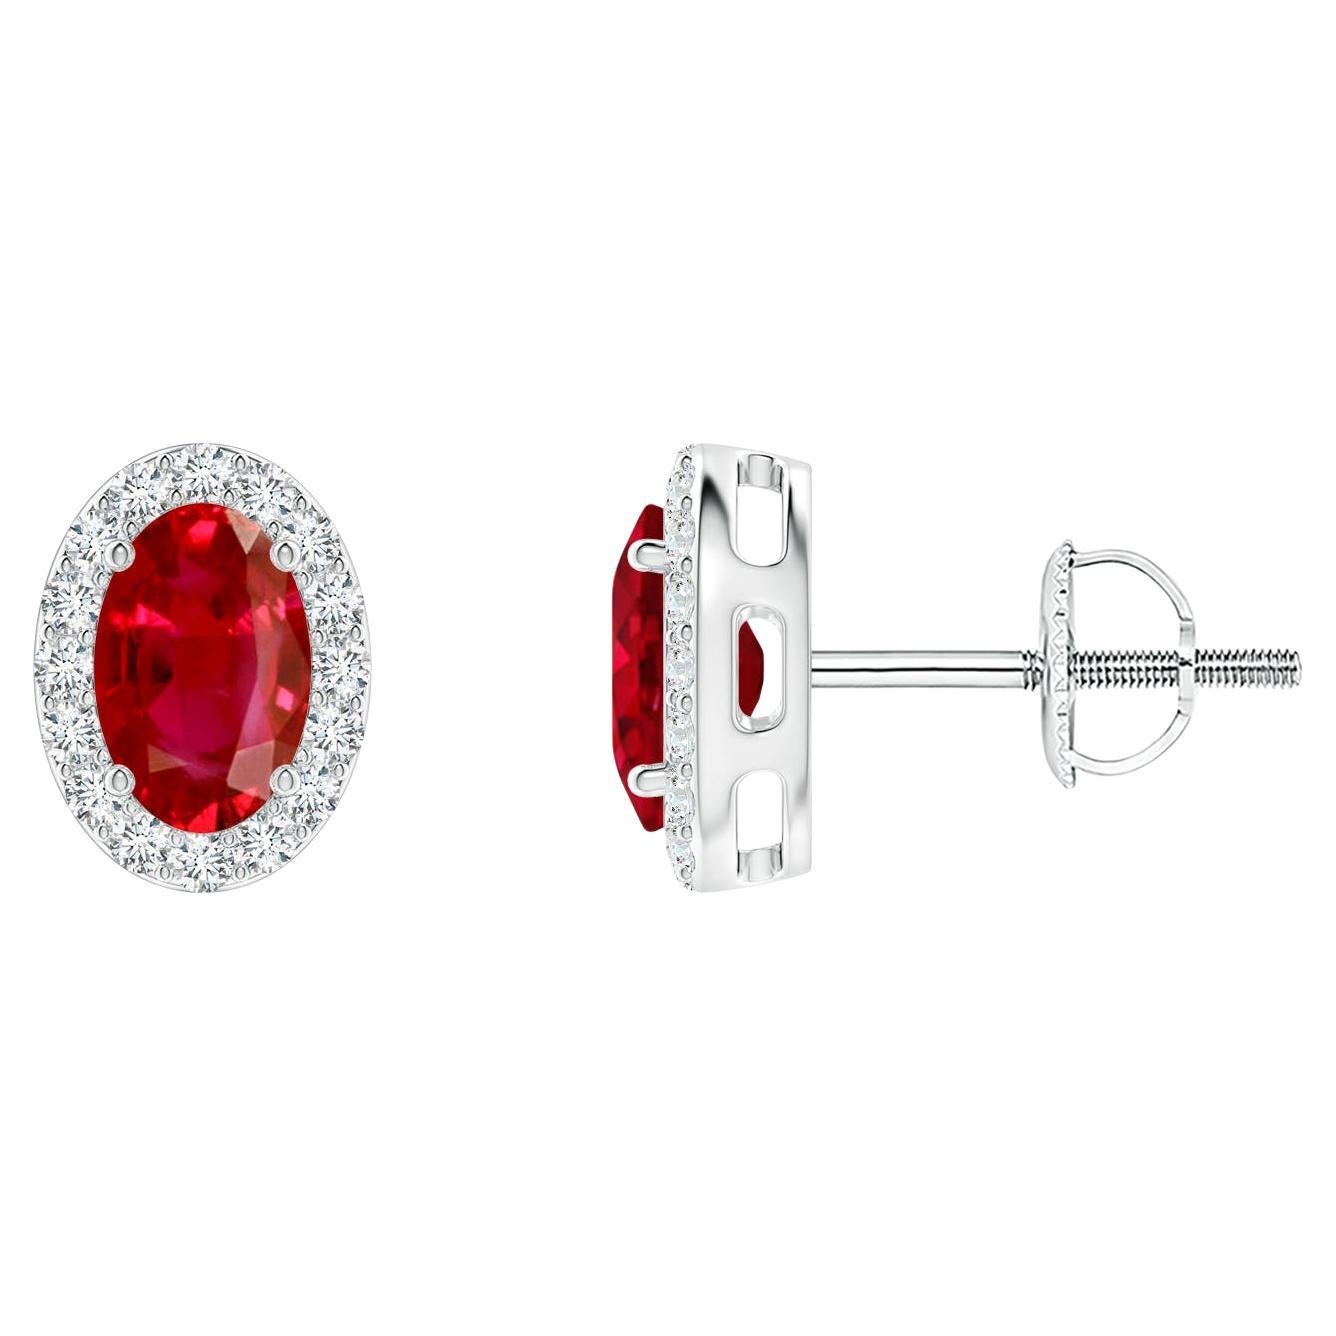 ANGARA Natural Oval 1.20ct Ruby Studs with Diamond Halo in 14K White Gold